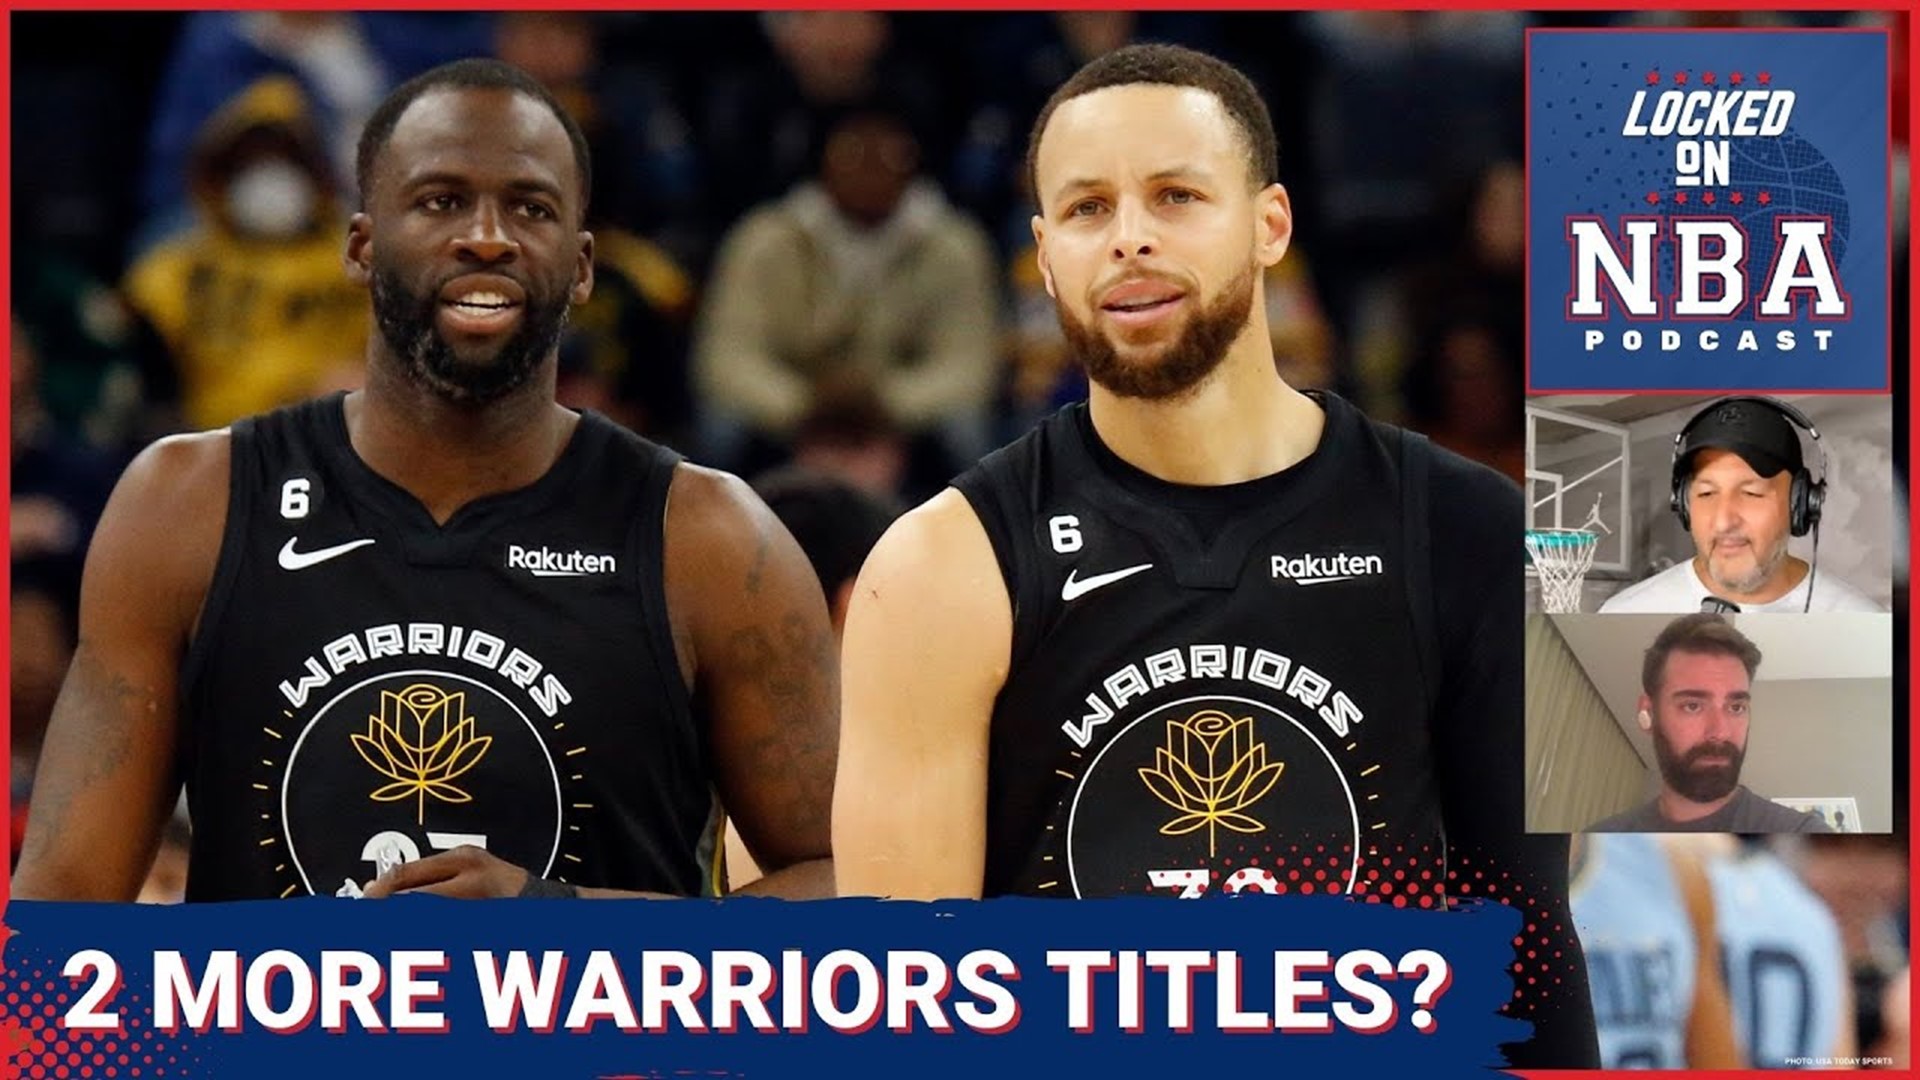 Draymond Green says the Golden State Warriors can win two more NBA Championships. But is that realistic with the new CBA?